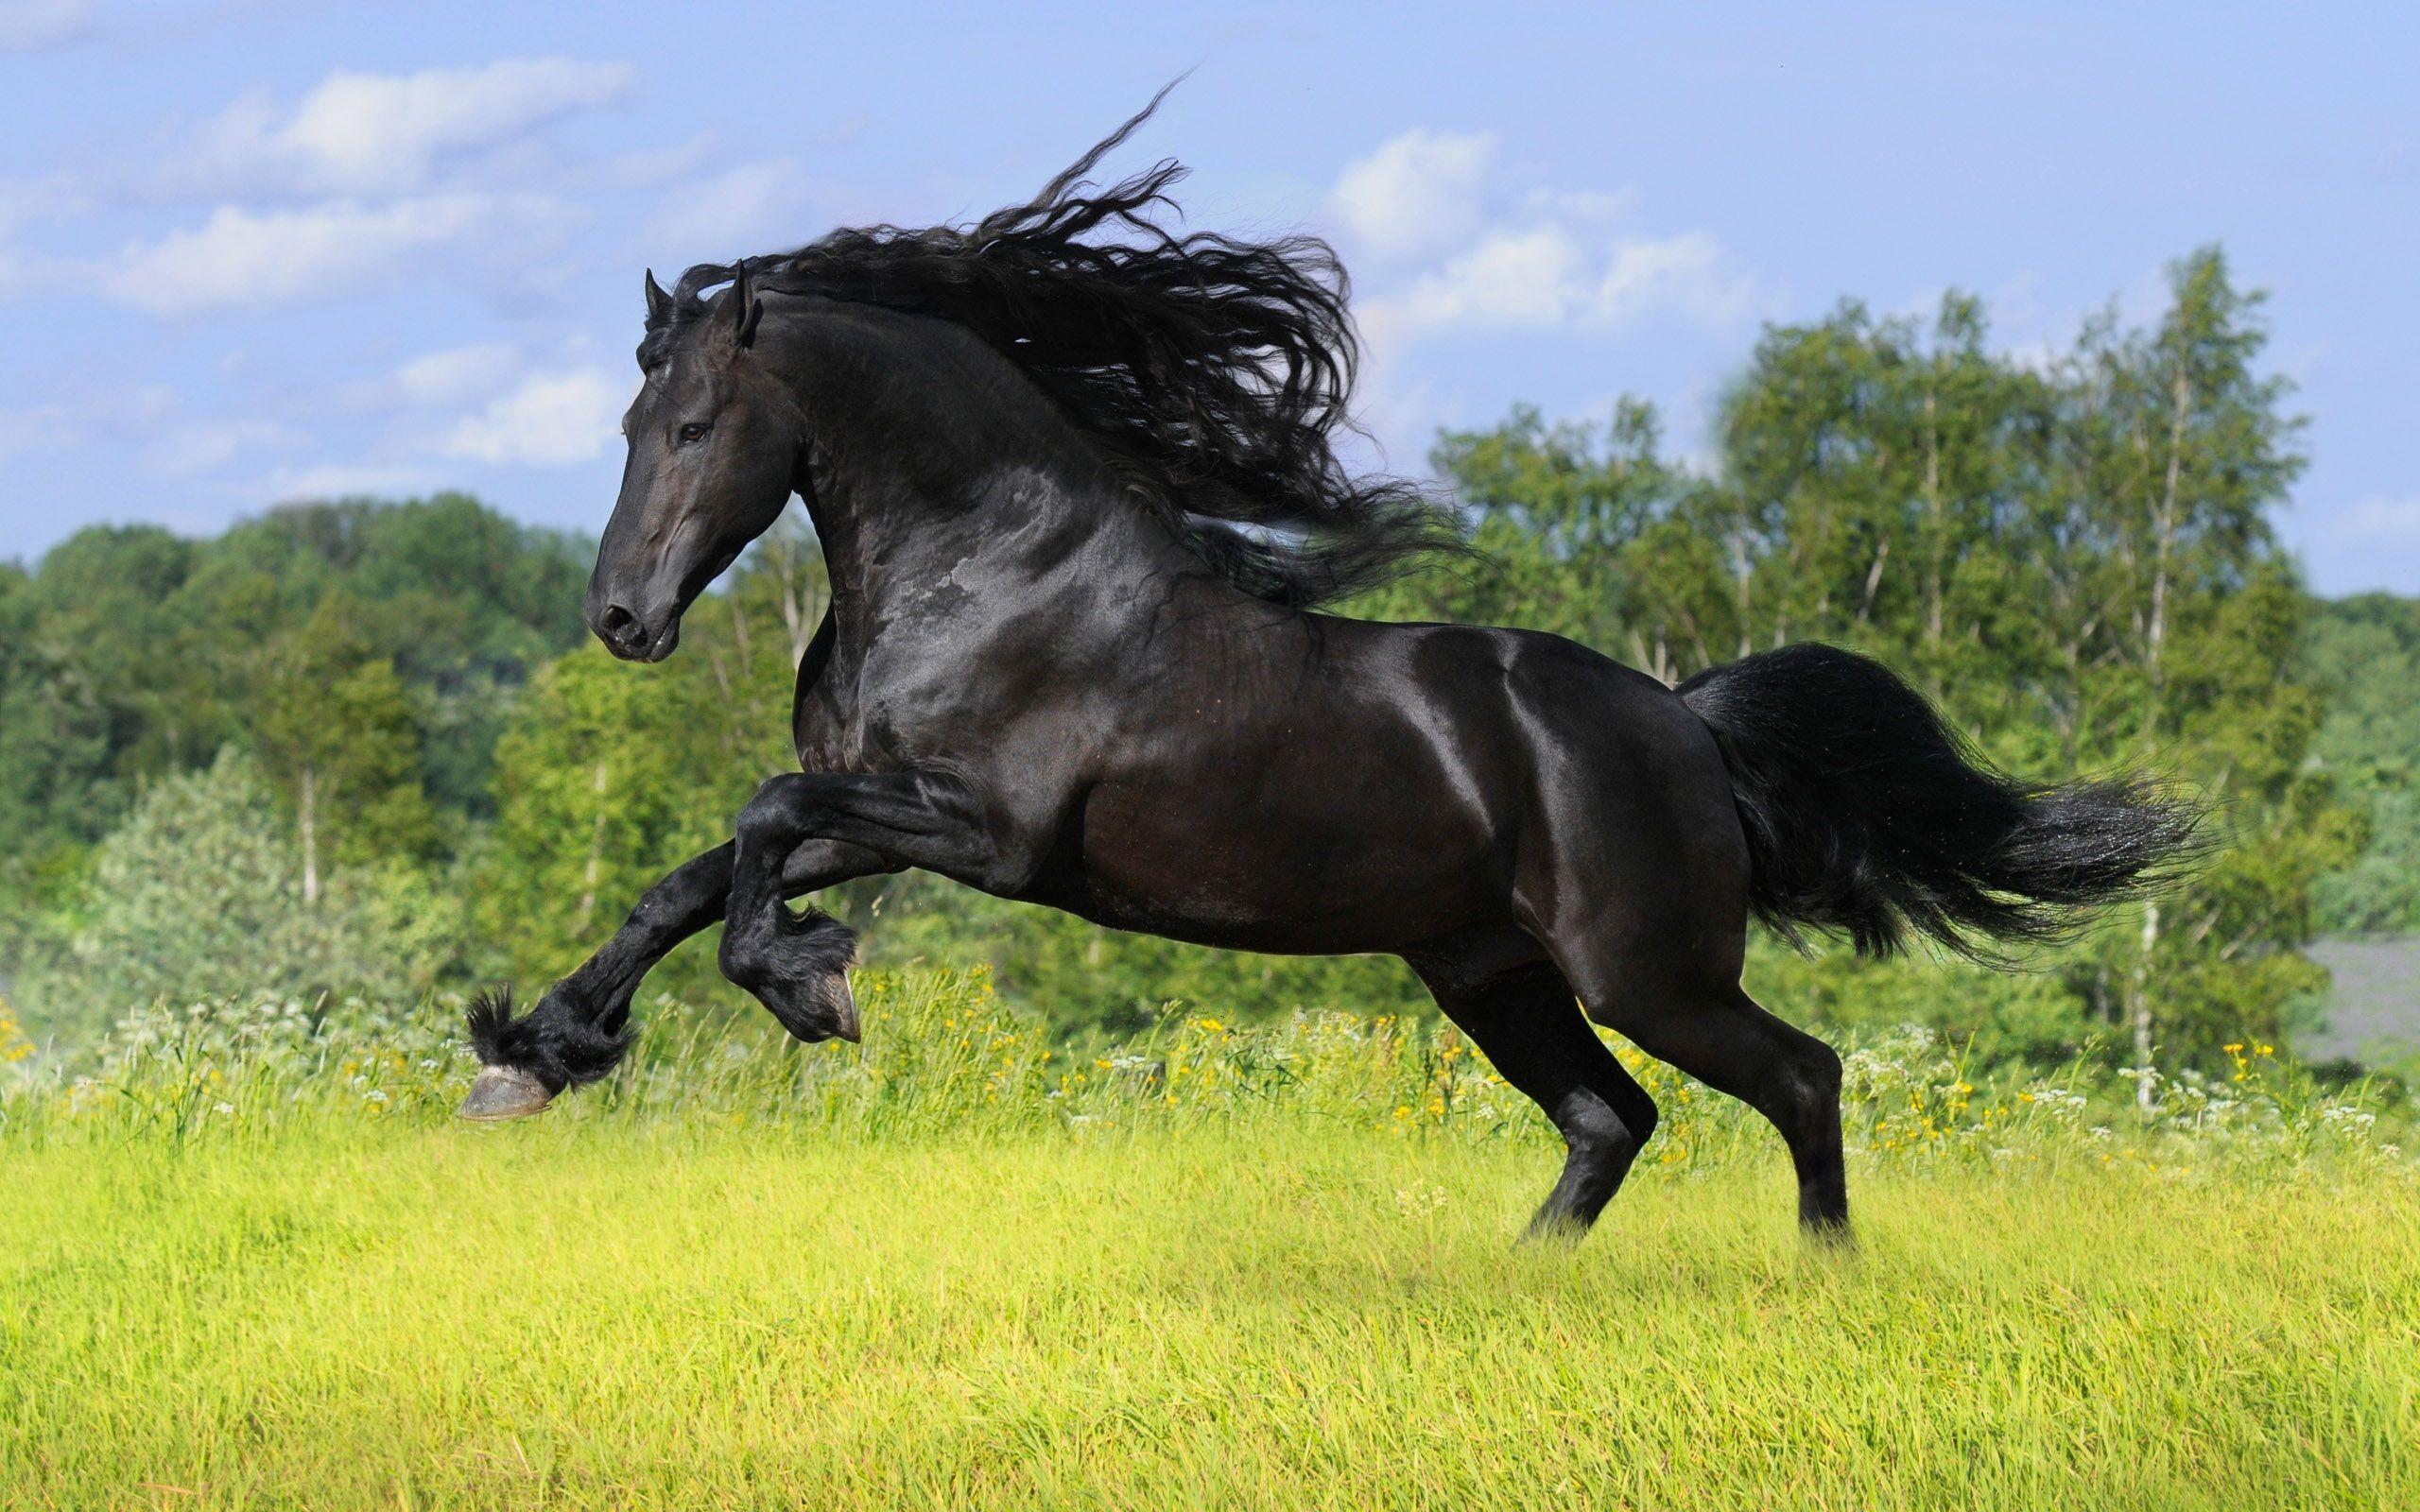 Black Horse HD Wallpaper Horse HD Picture & Image